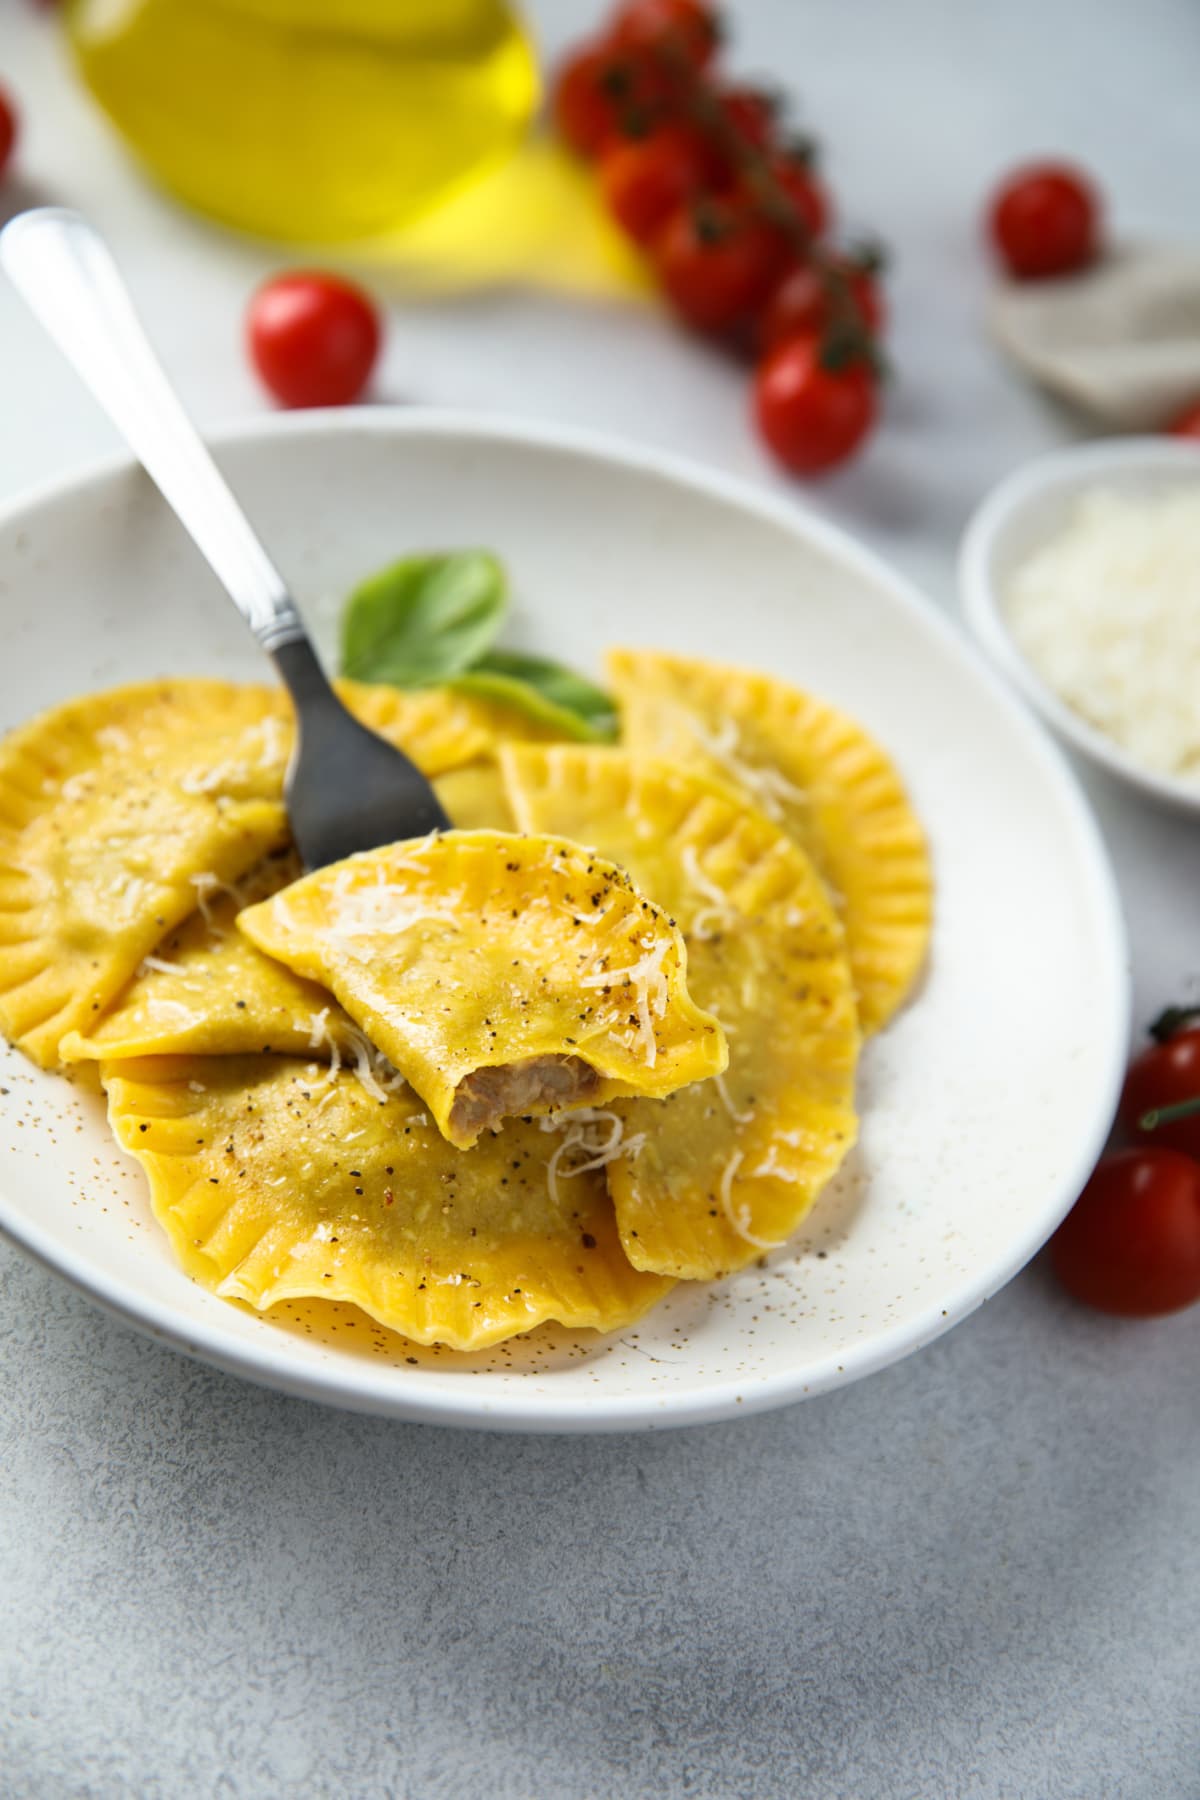 Bowl of ravioli with a fork